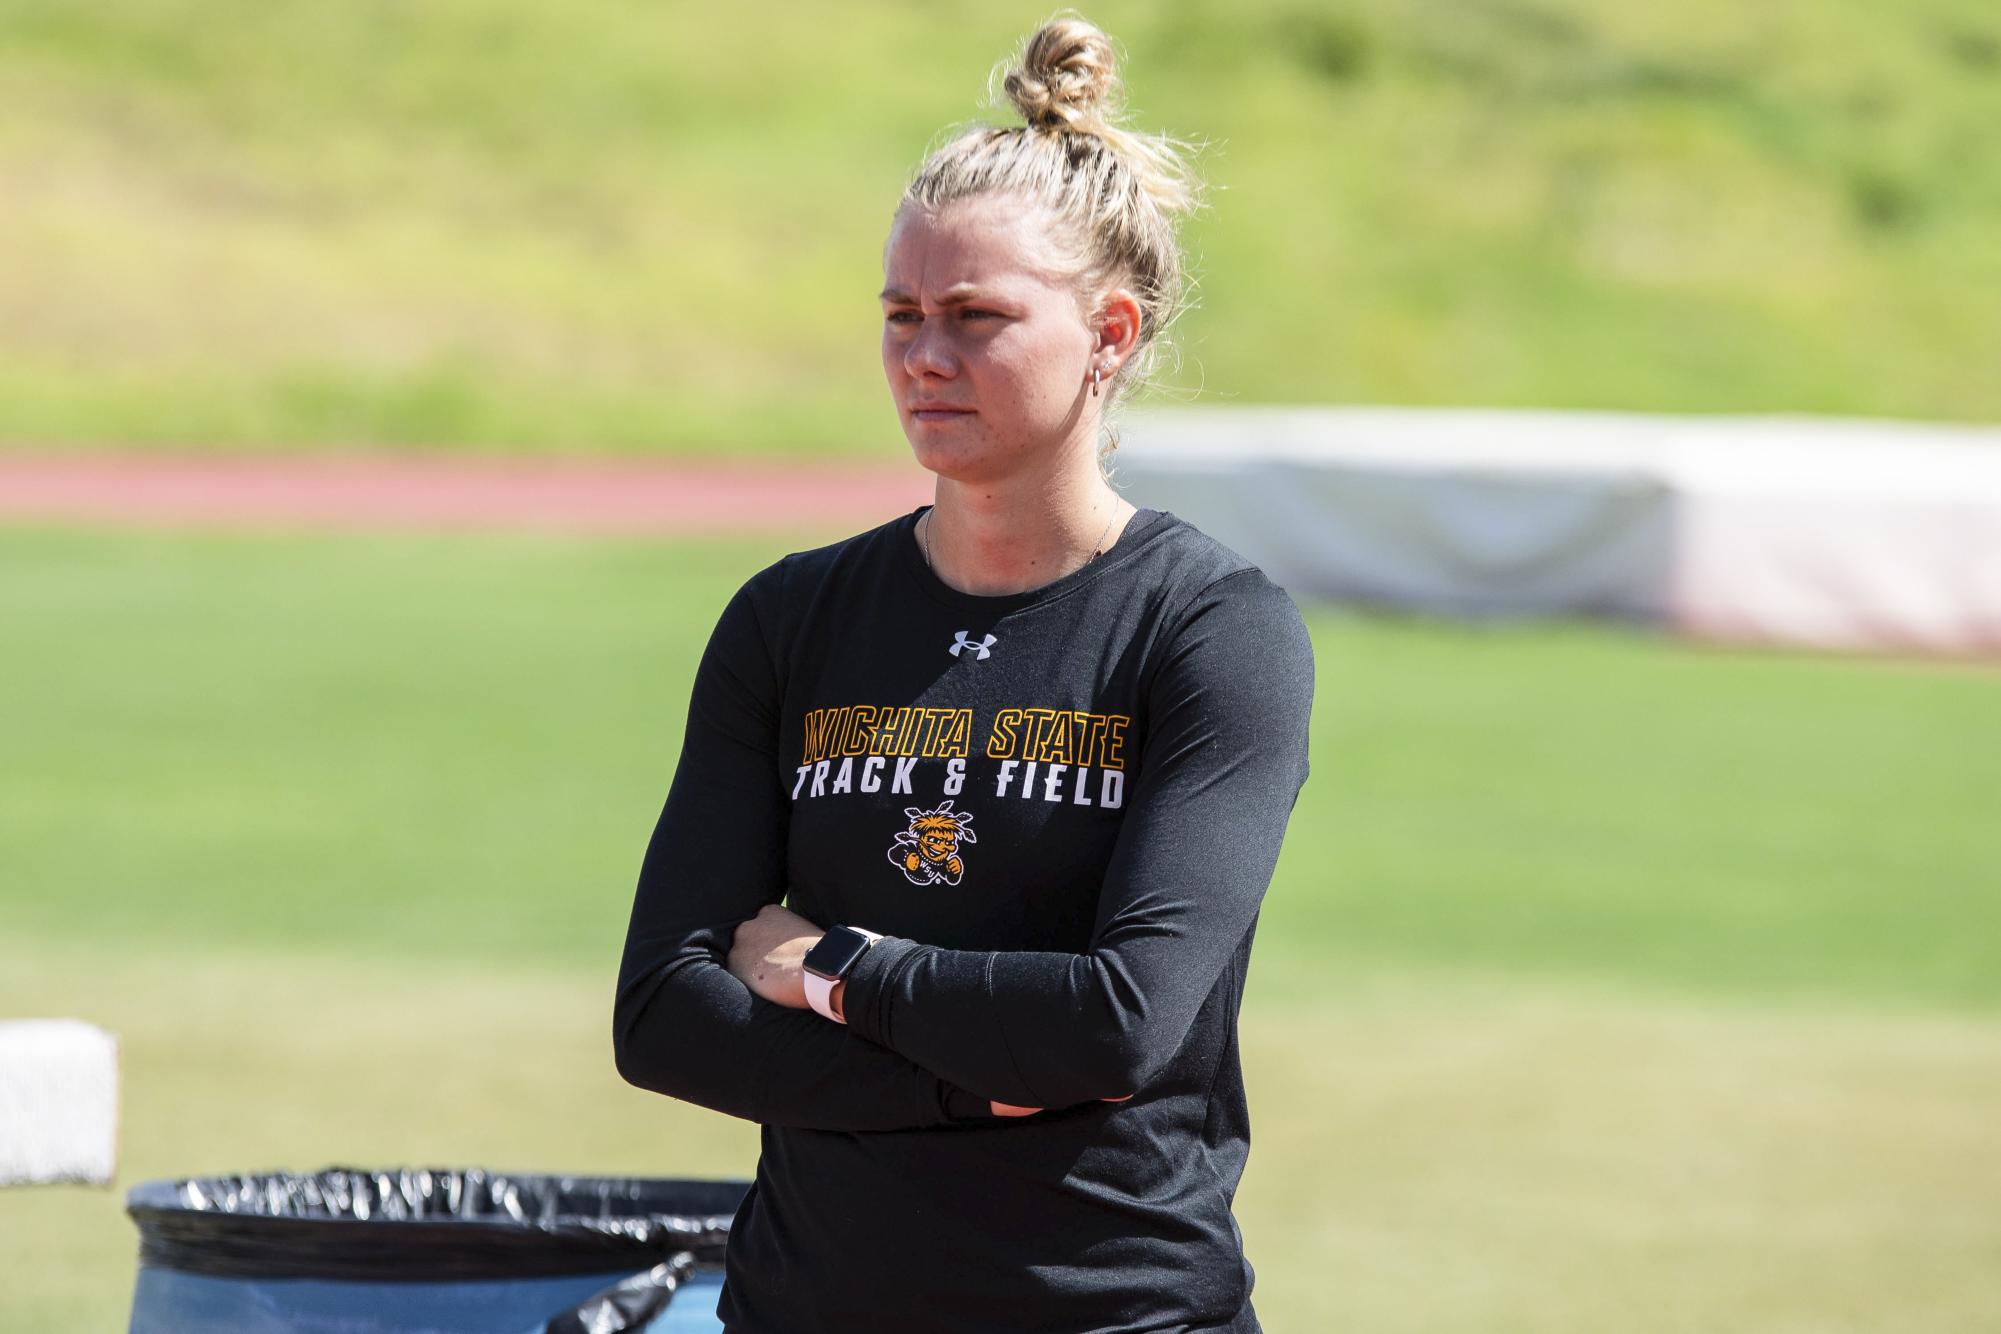 Aliyah Welters, an assistant coach for Wichita States track and field team, watches runners at the Sept. 12 practice. Welters helps coach pole vaulters on the team.